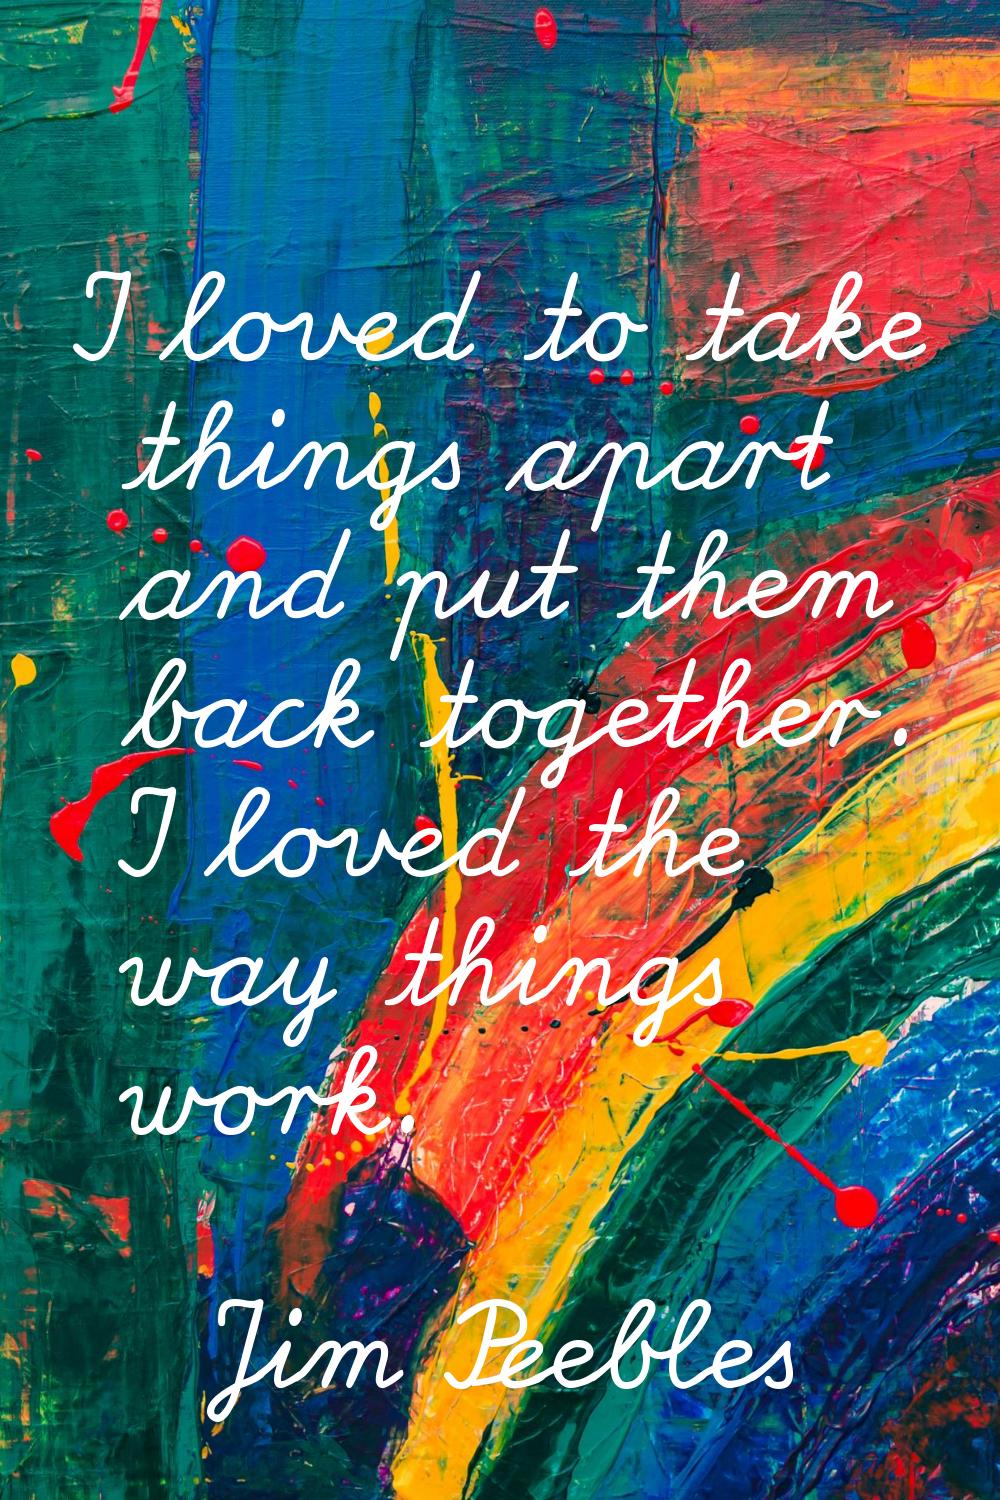 I loved to take things apart and put them back together. I loved the way things work.